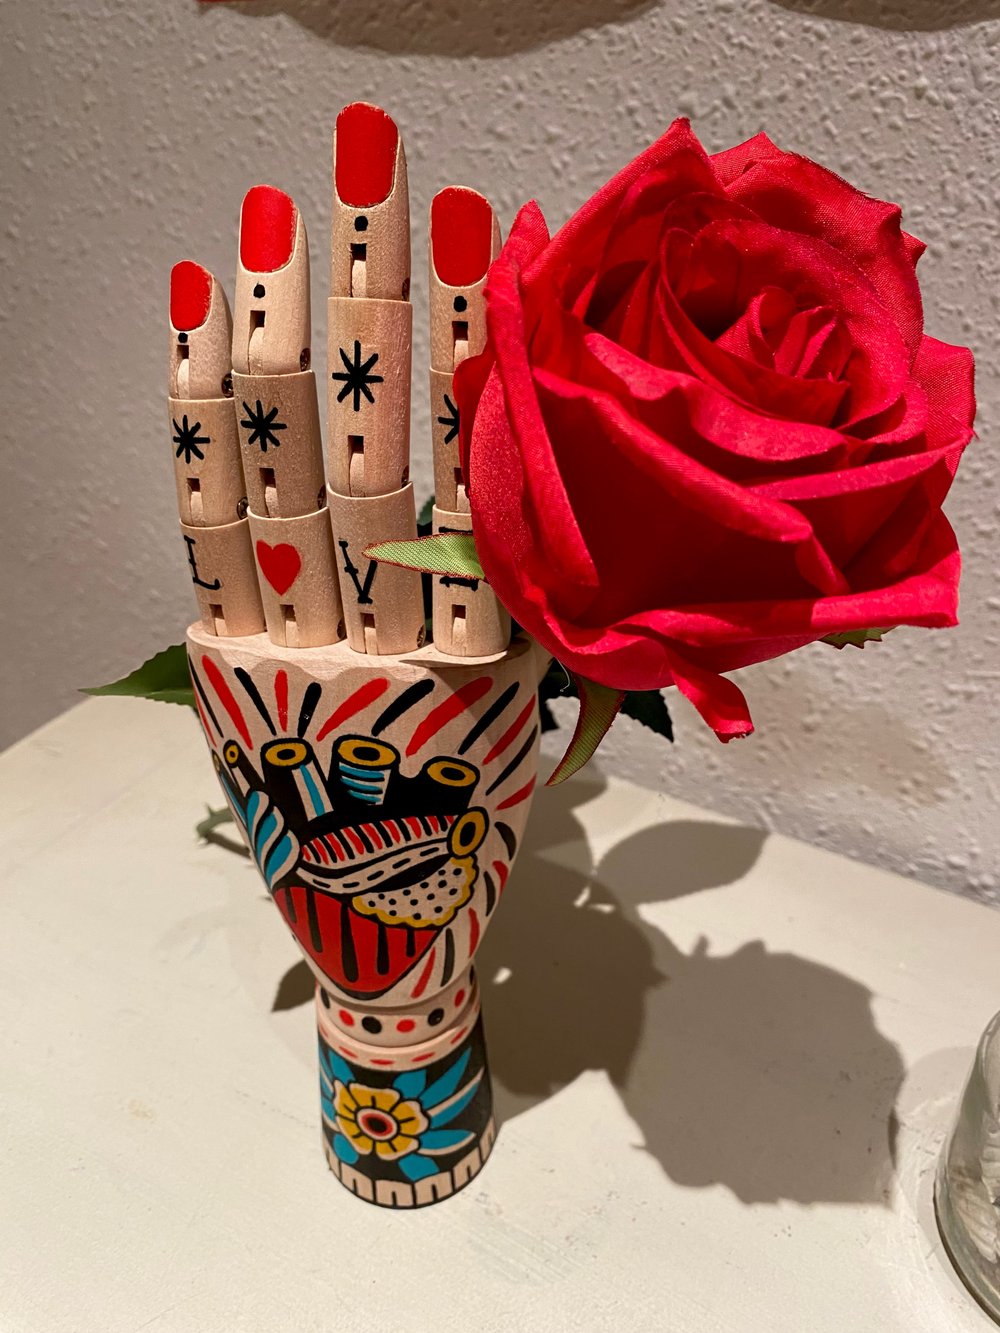 Hand with Rose / Acrylic on wood